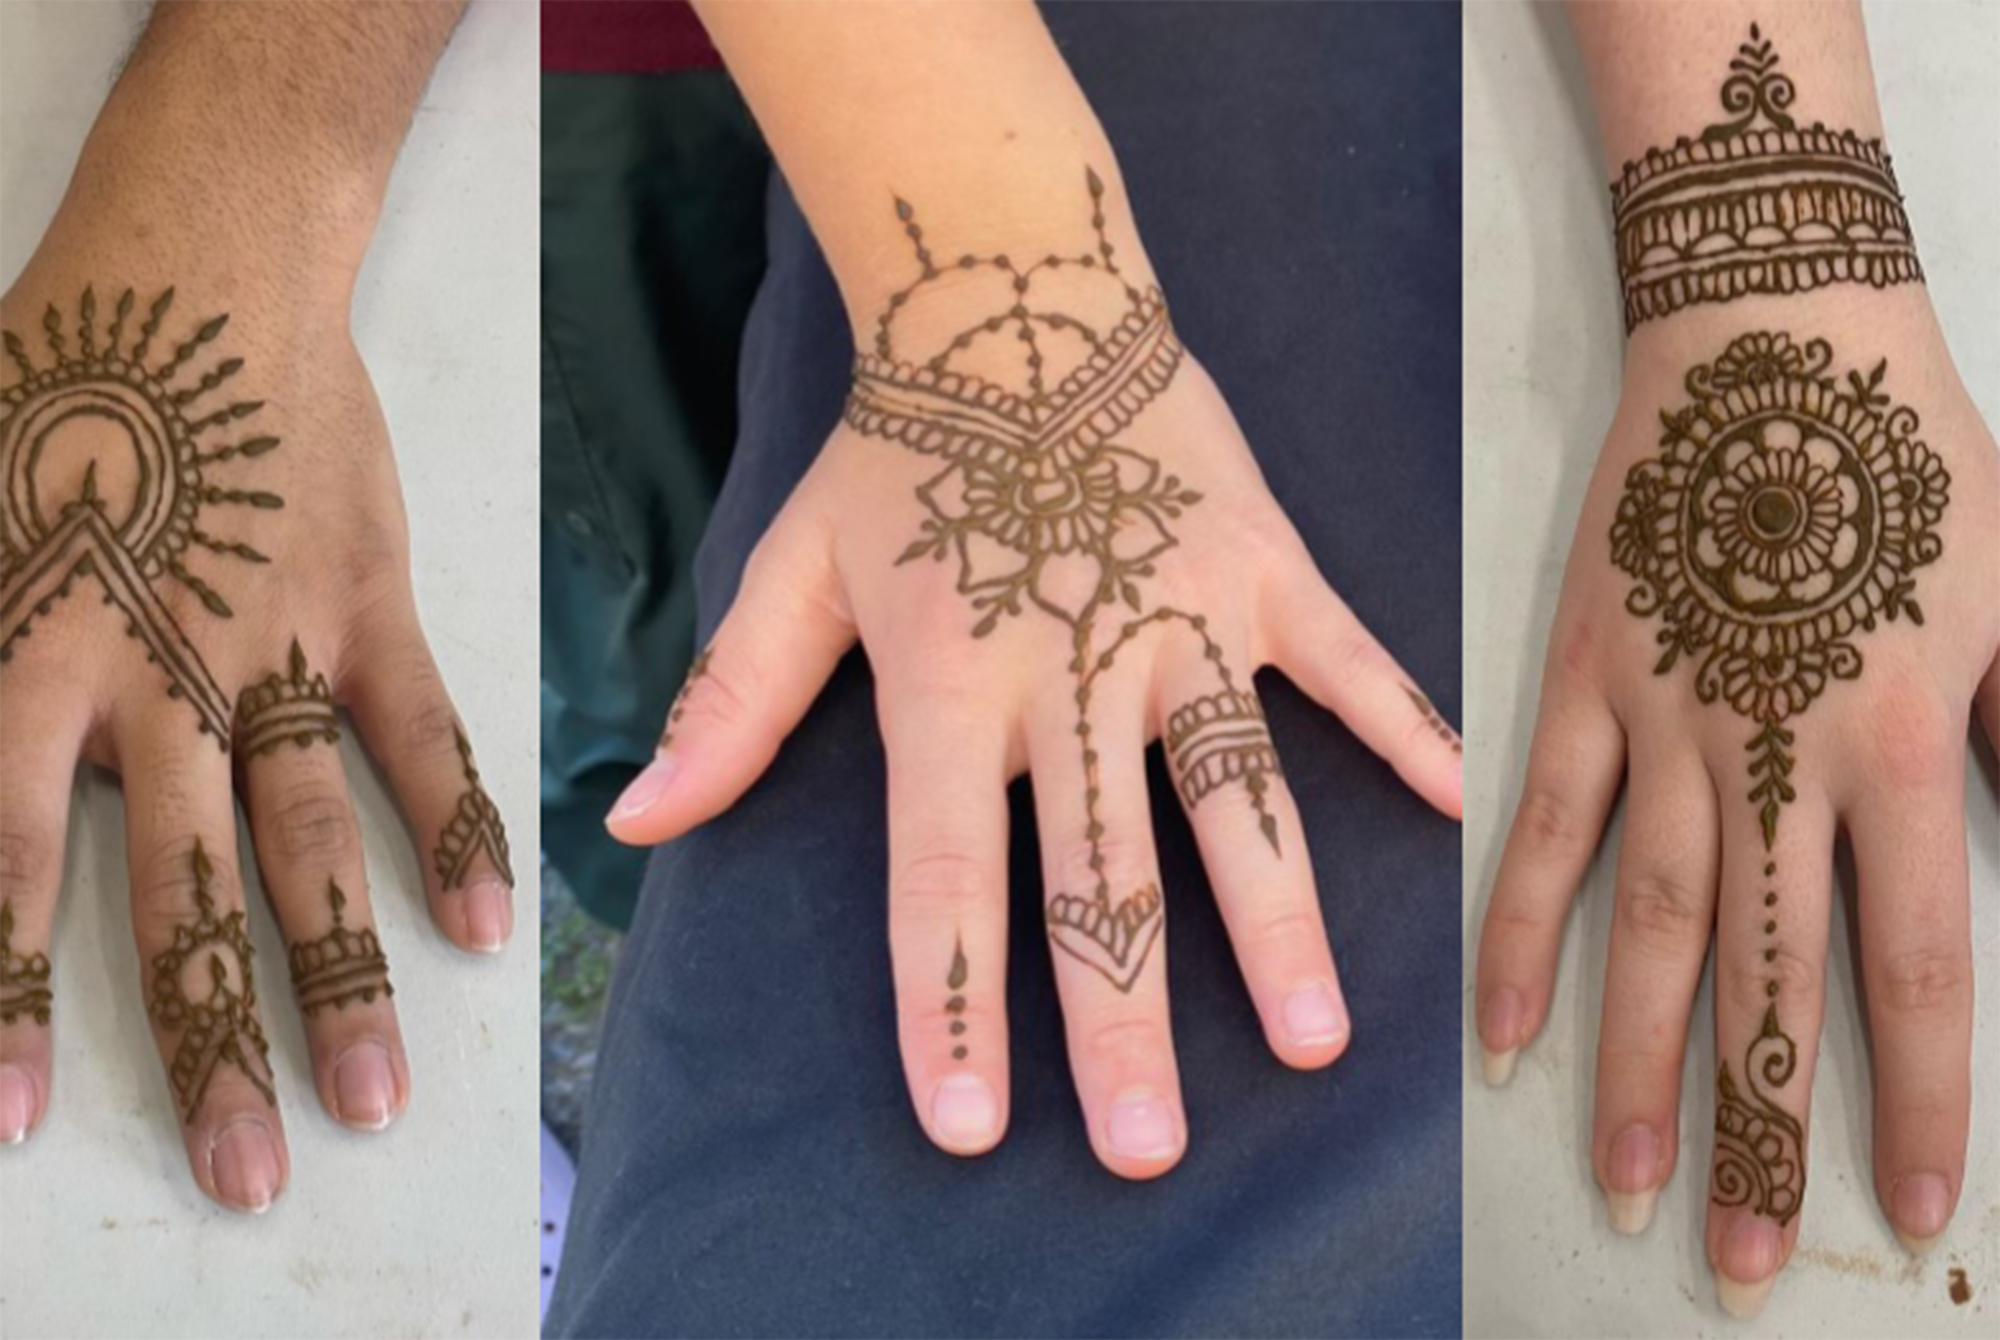 Three different designs of henna done by Shelina Syed.